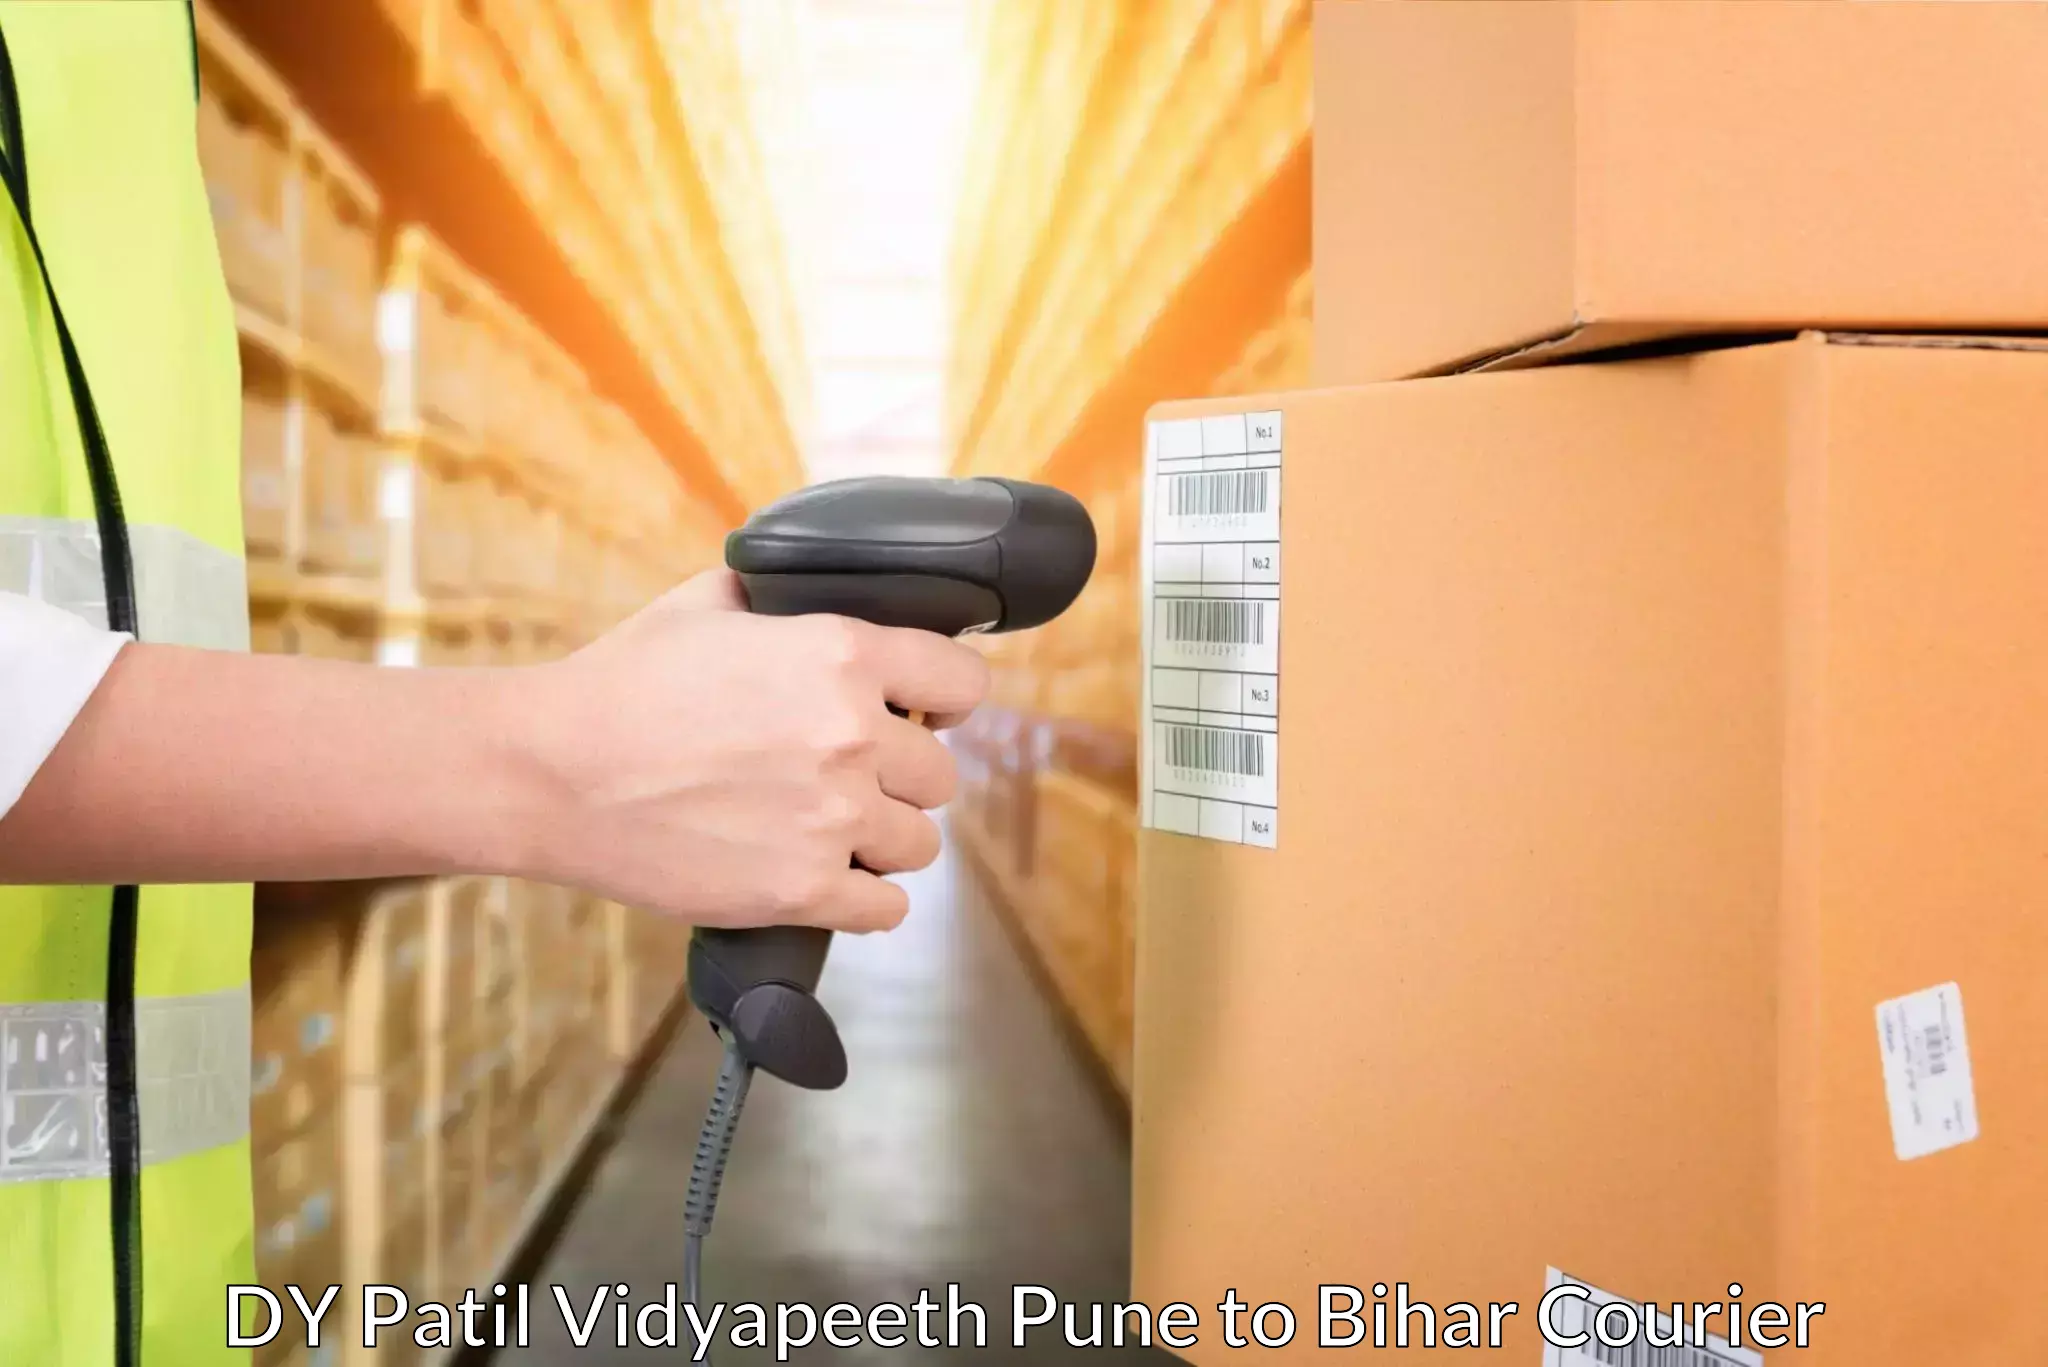 State-of-the-art courier technology in DY Patil Vidyapeeth Pune to Bihar